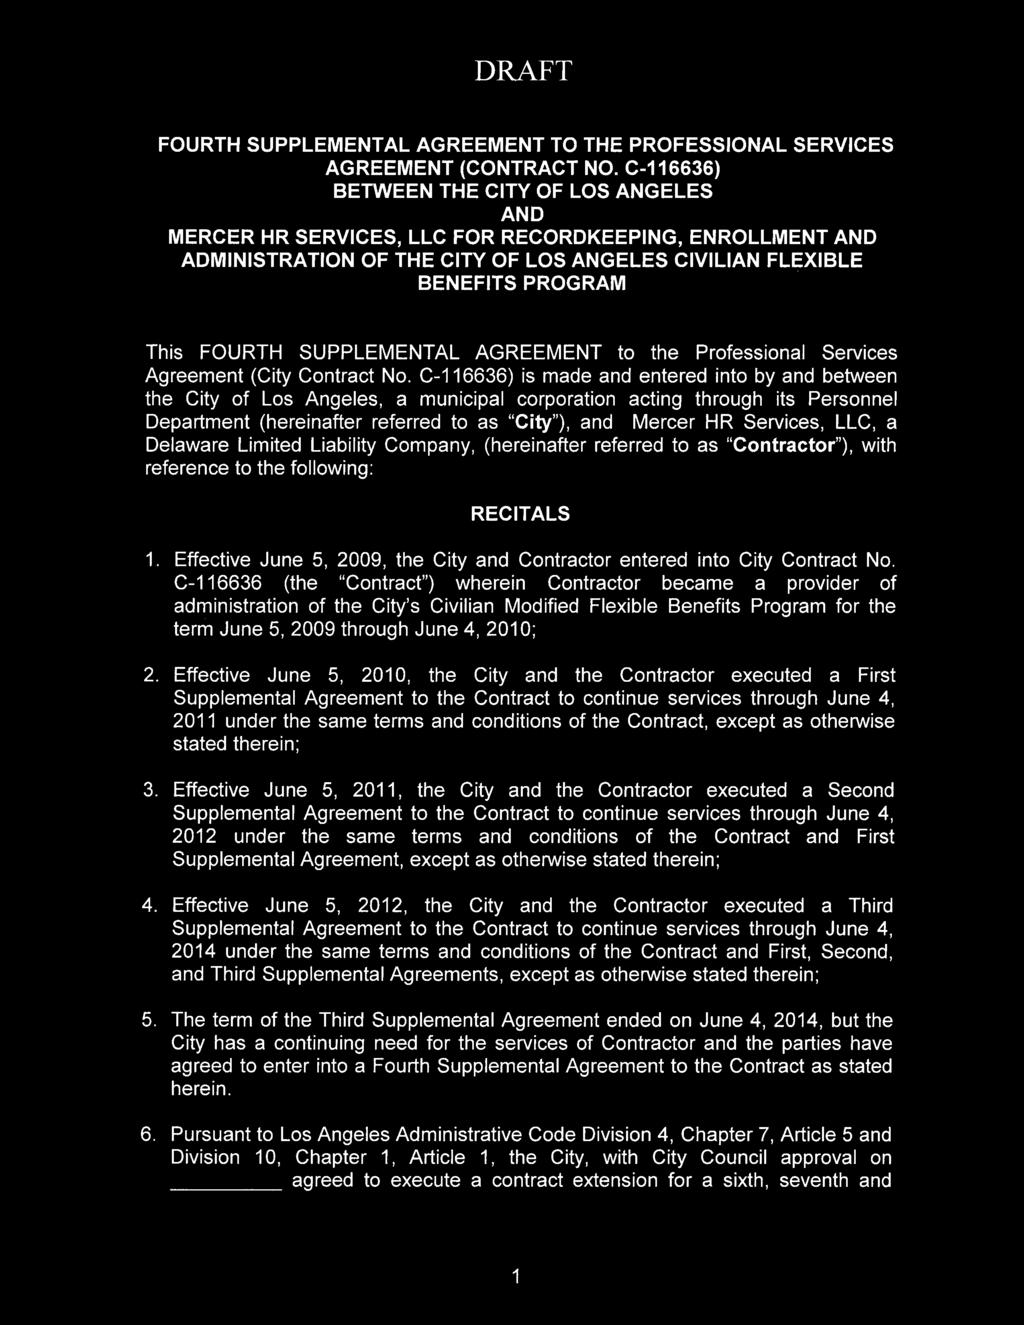 SUPPLEMENTAL AGREEMENT to the Professional Services Agreement (City Contract No.